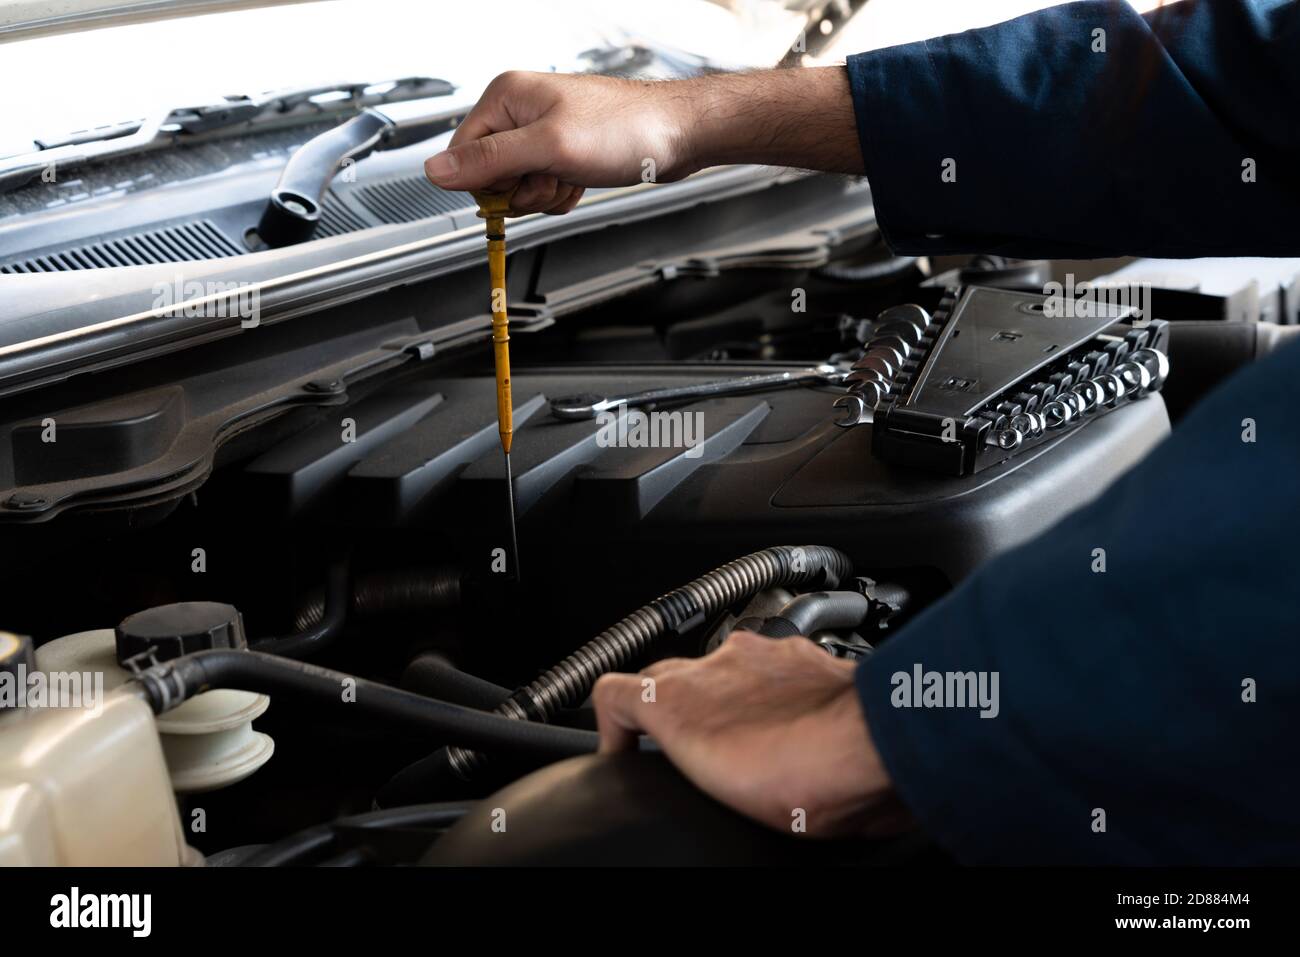 Professional mechanic providing car repair and maintenance service in auto garage. Car service business concept. Stock Photo